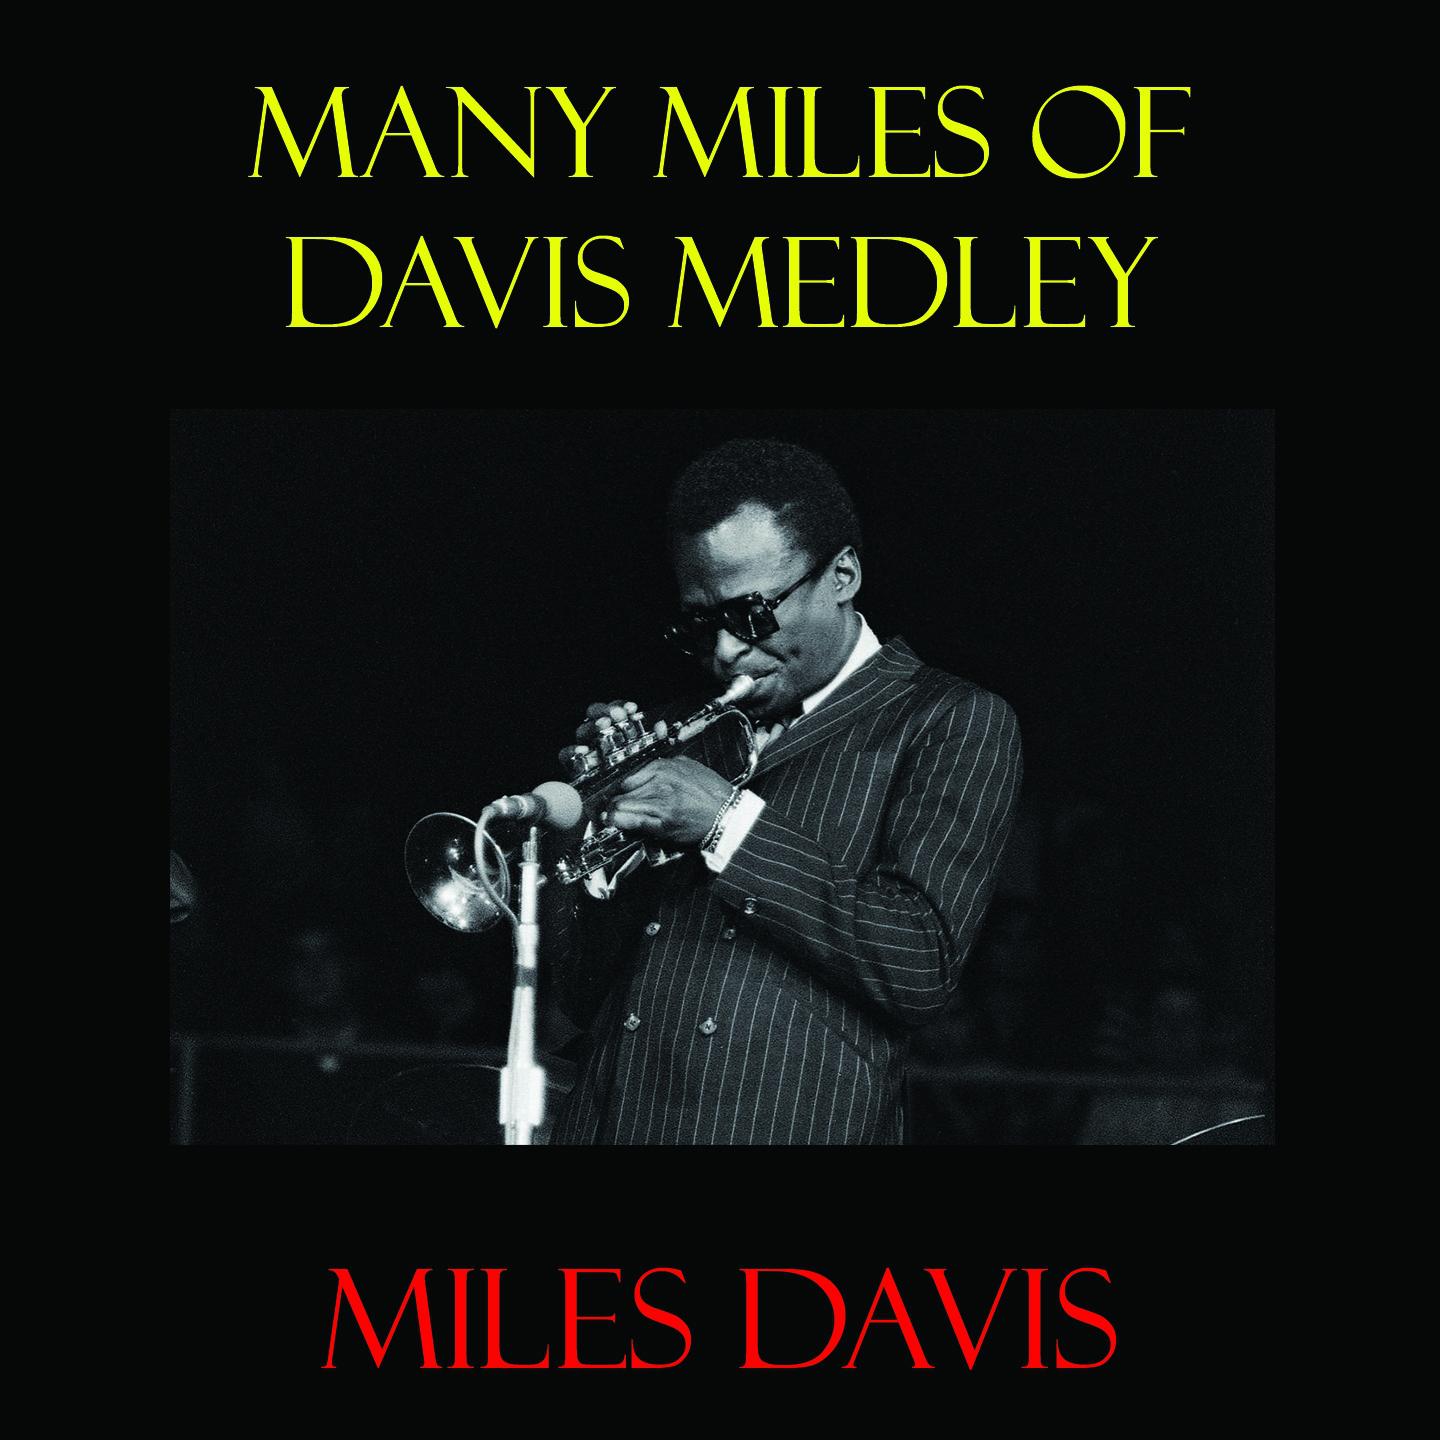 Many Miles of Davis Medley: Out of Nowhere / A Night in Tunisia / Yardbird Suite / Ornithology / Moose the Mooch / Embraceable You / Bird of Paradise / My Old Flame / Don't Blame Me / Scrapple from the Apple